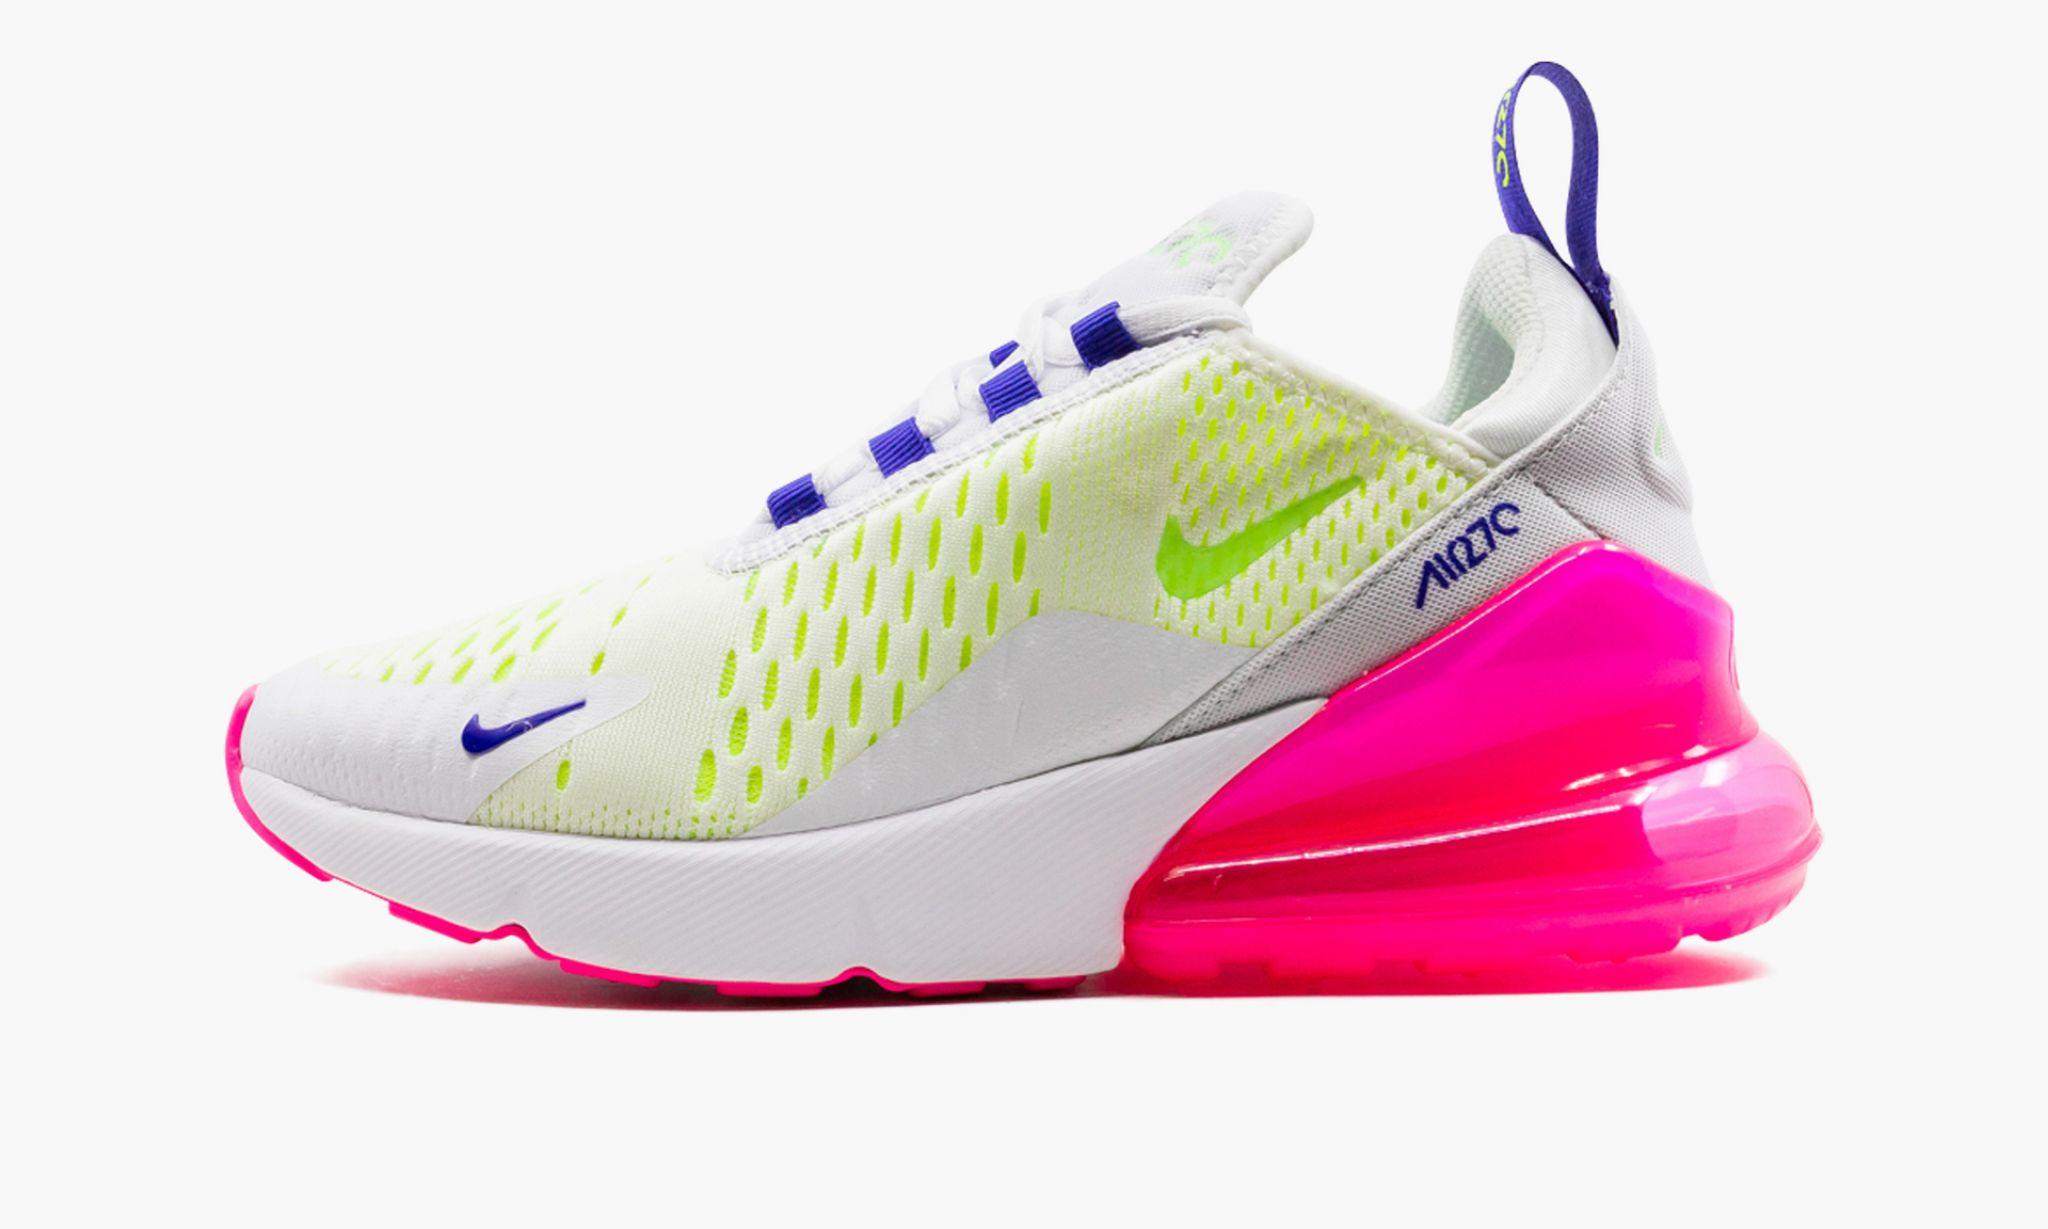 Nike pink and white air max Rubber Air Max 270 "white / Pink Blast / Volt" Shoes | Lyst